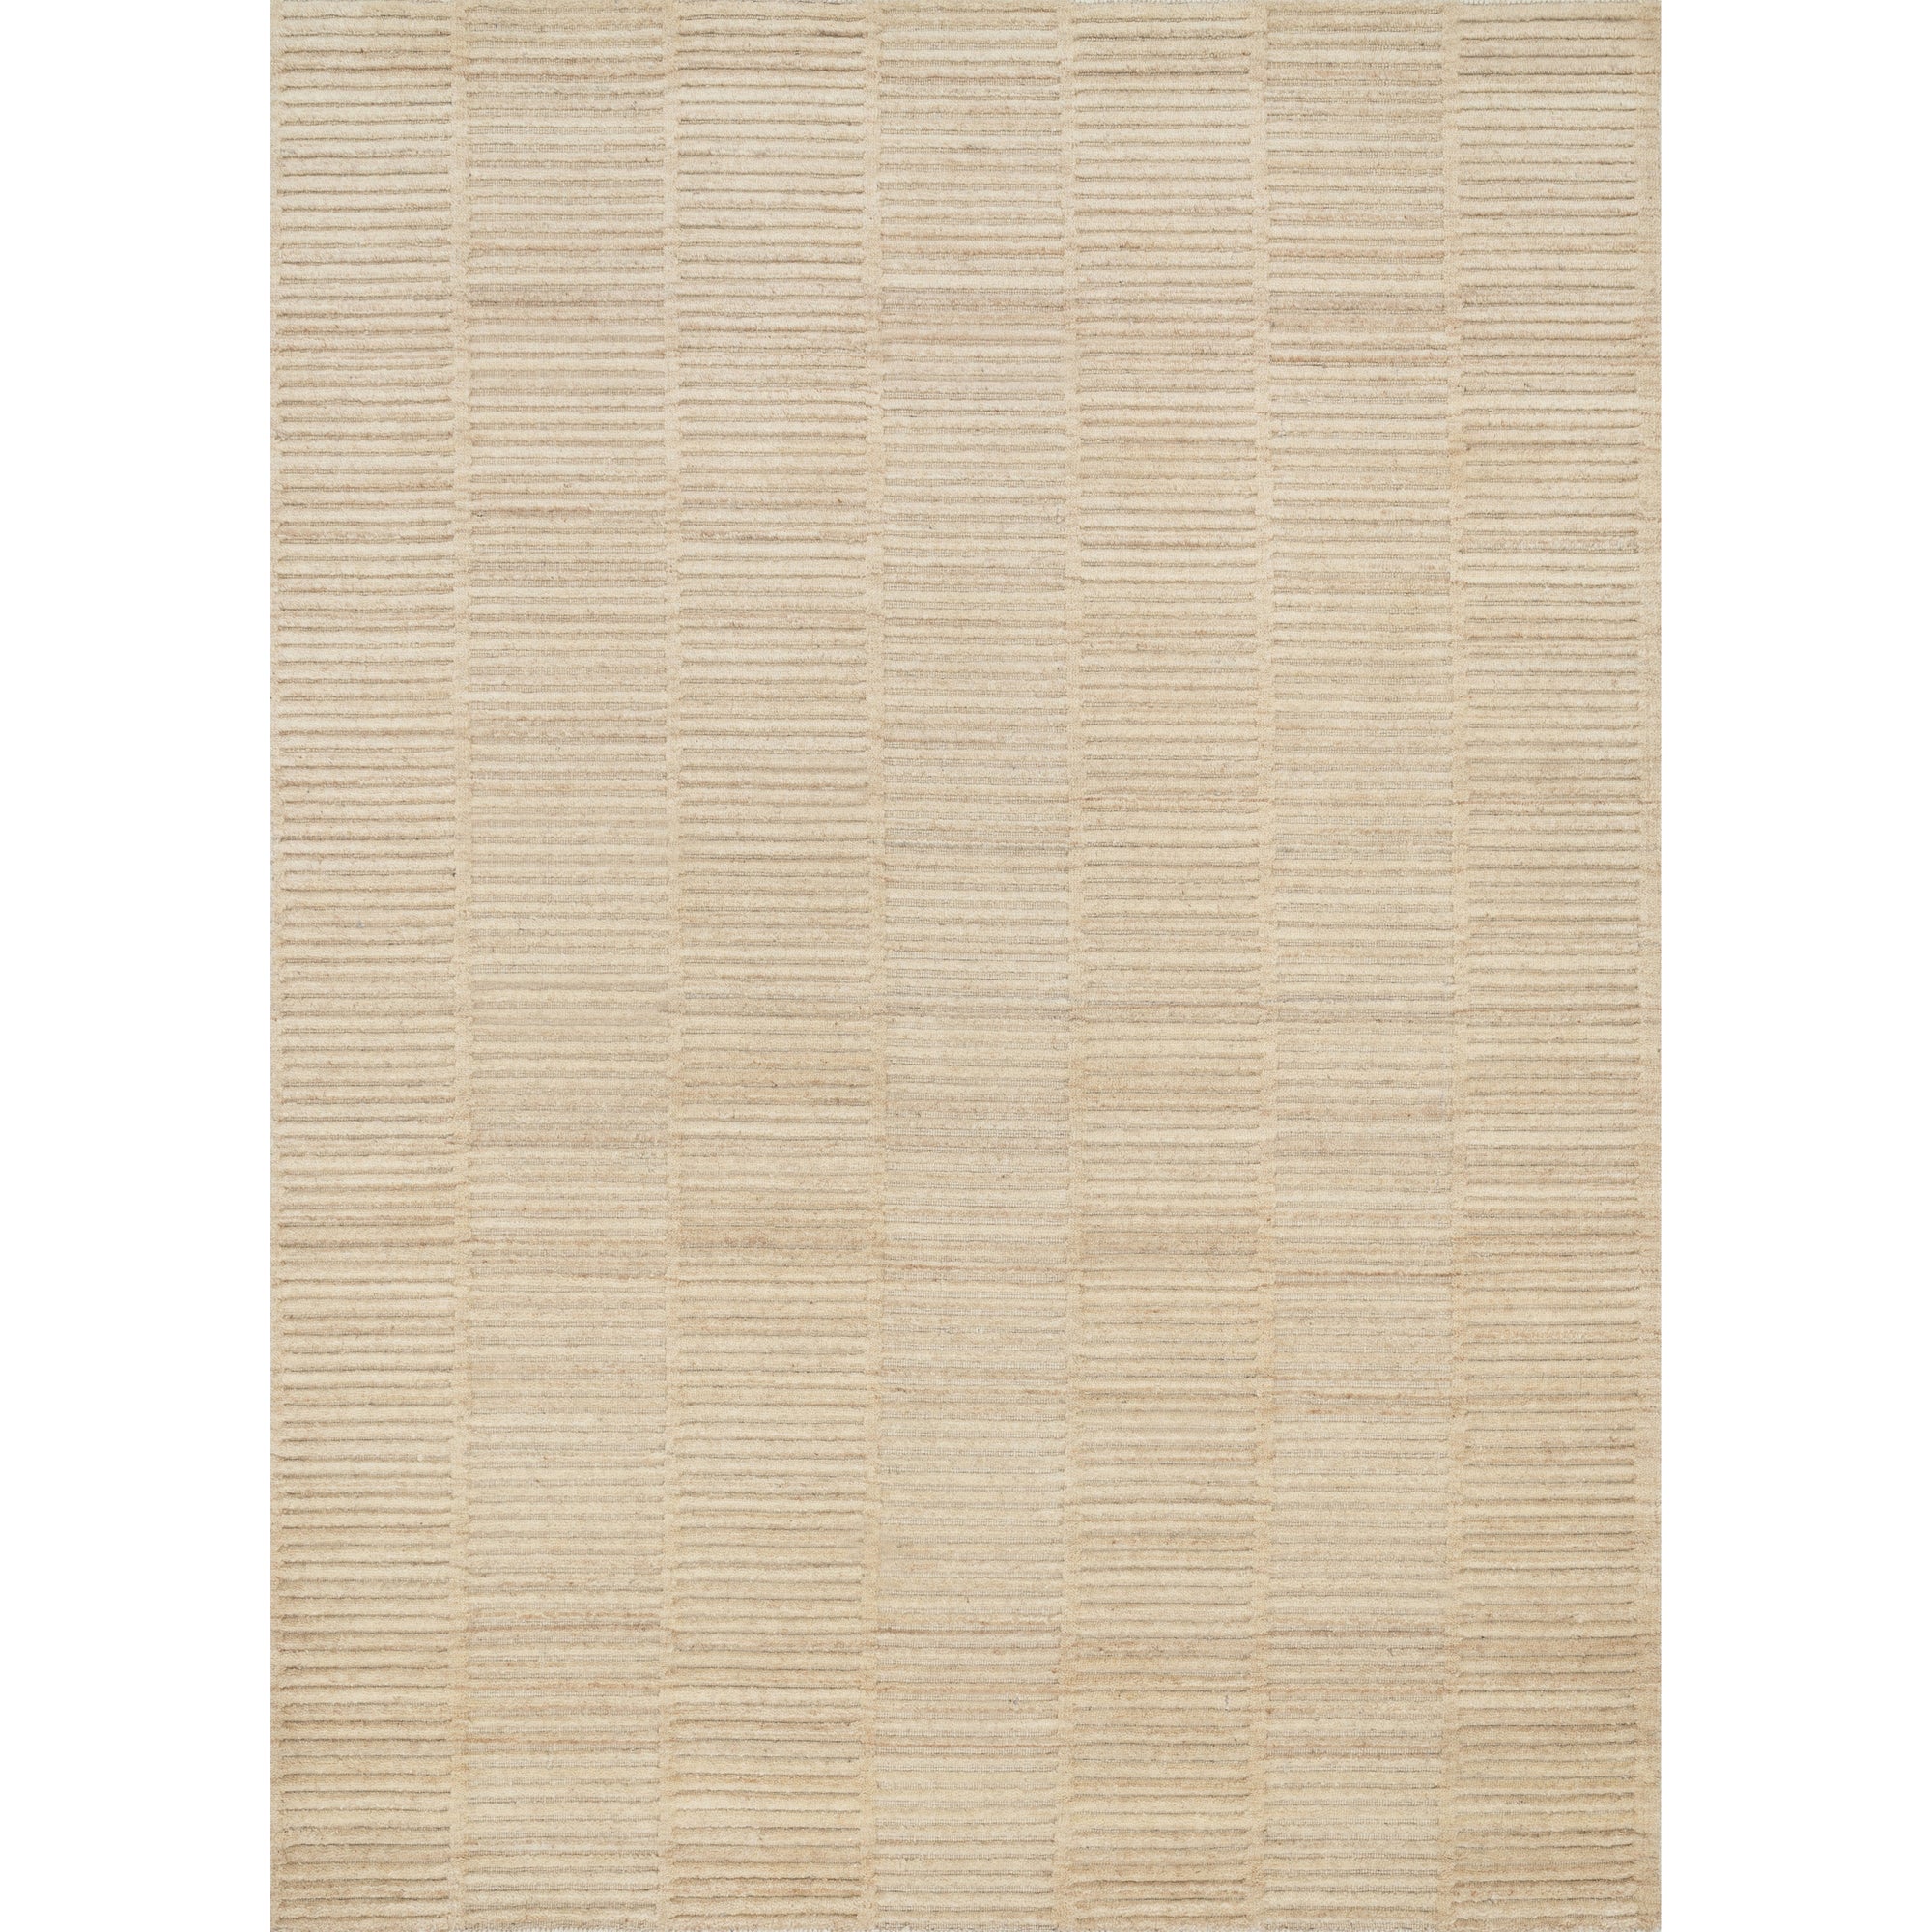 Rugs by Roo Loloi Hadley Natural Area Rug in size 18" x 18" Sample